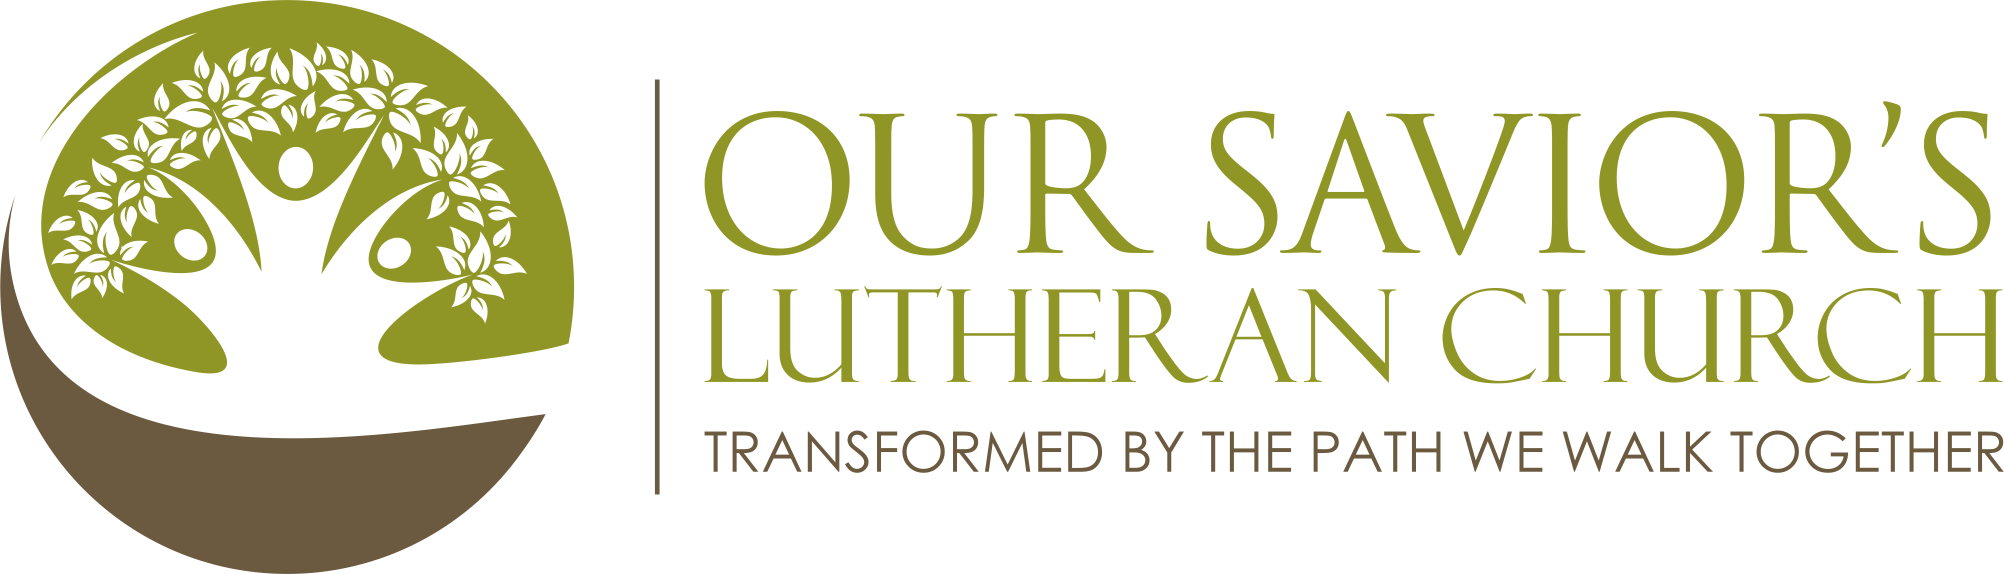 Our Savior's Lutheran Church. Transformed by the path we walk together.